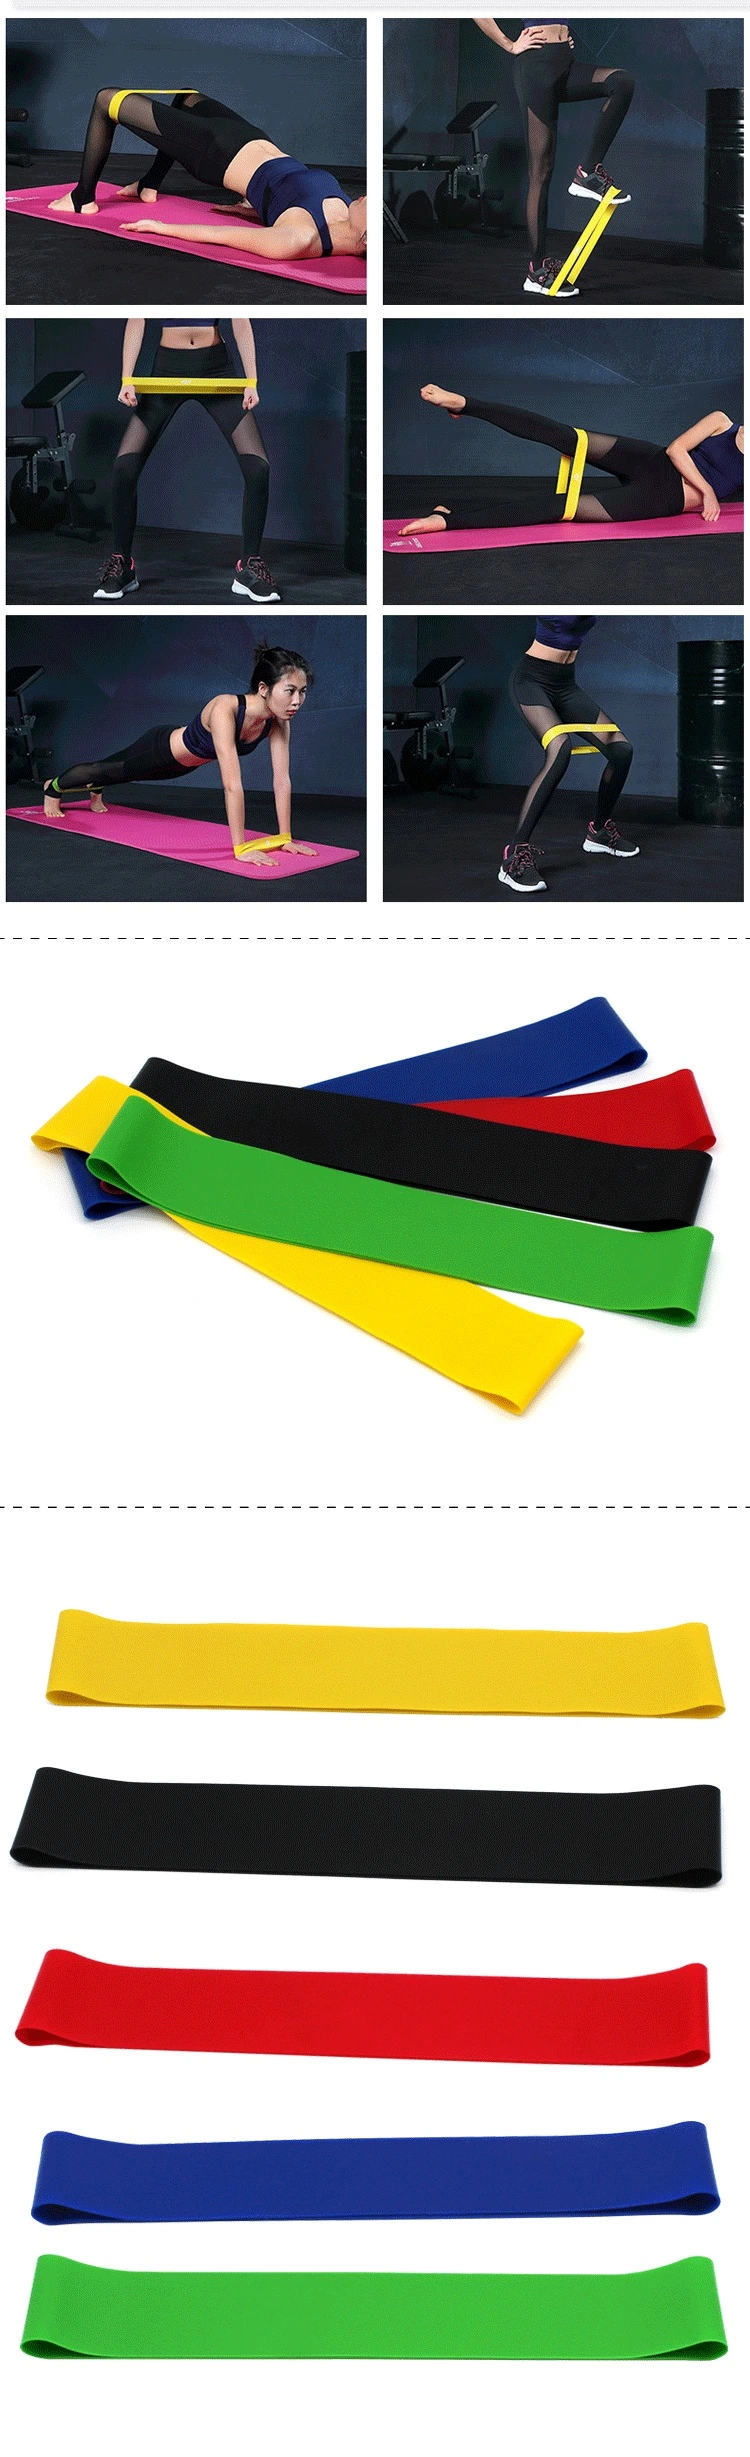 Exercise Rubber Resistance Band, Workout Fitness Theraband